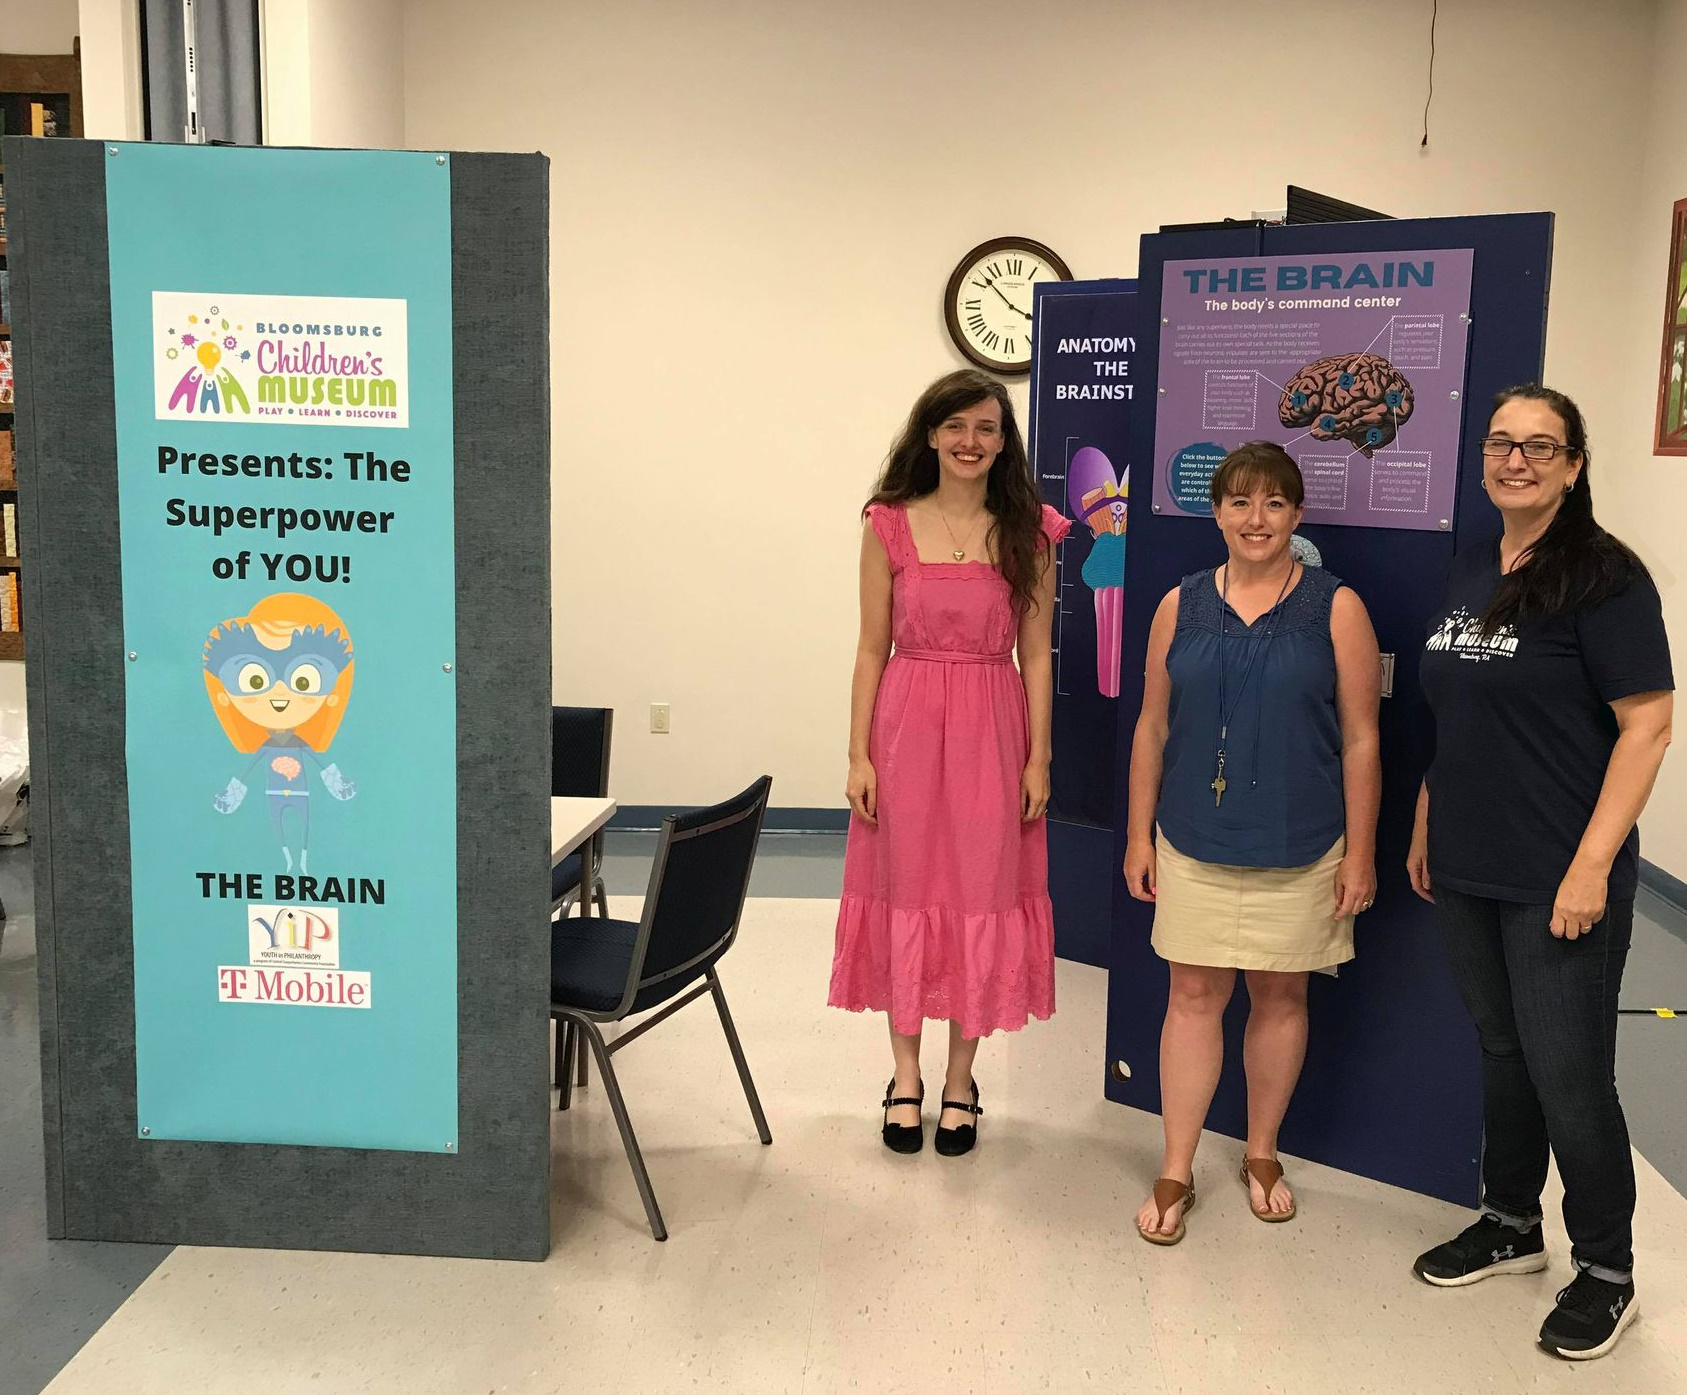 The Bloomsburg Children’s Museum, in partnership with the McBride Library and United in Recovery, recently partnered to provide a pop-up exhibit in Berwick.